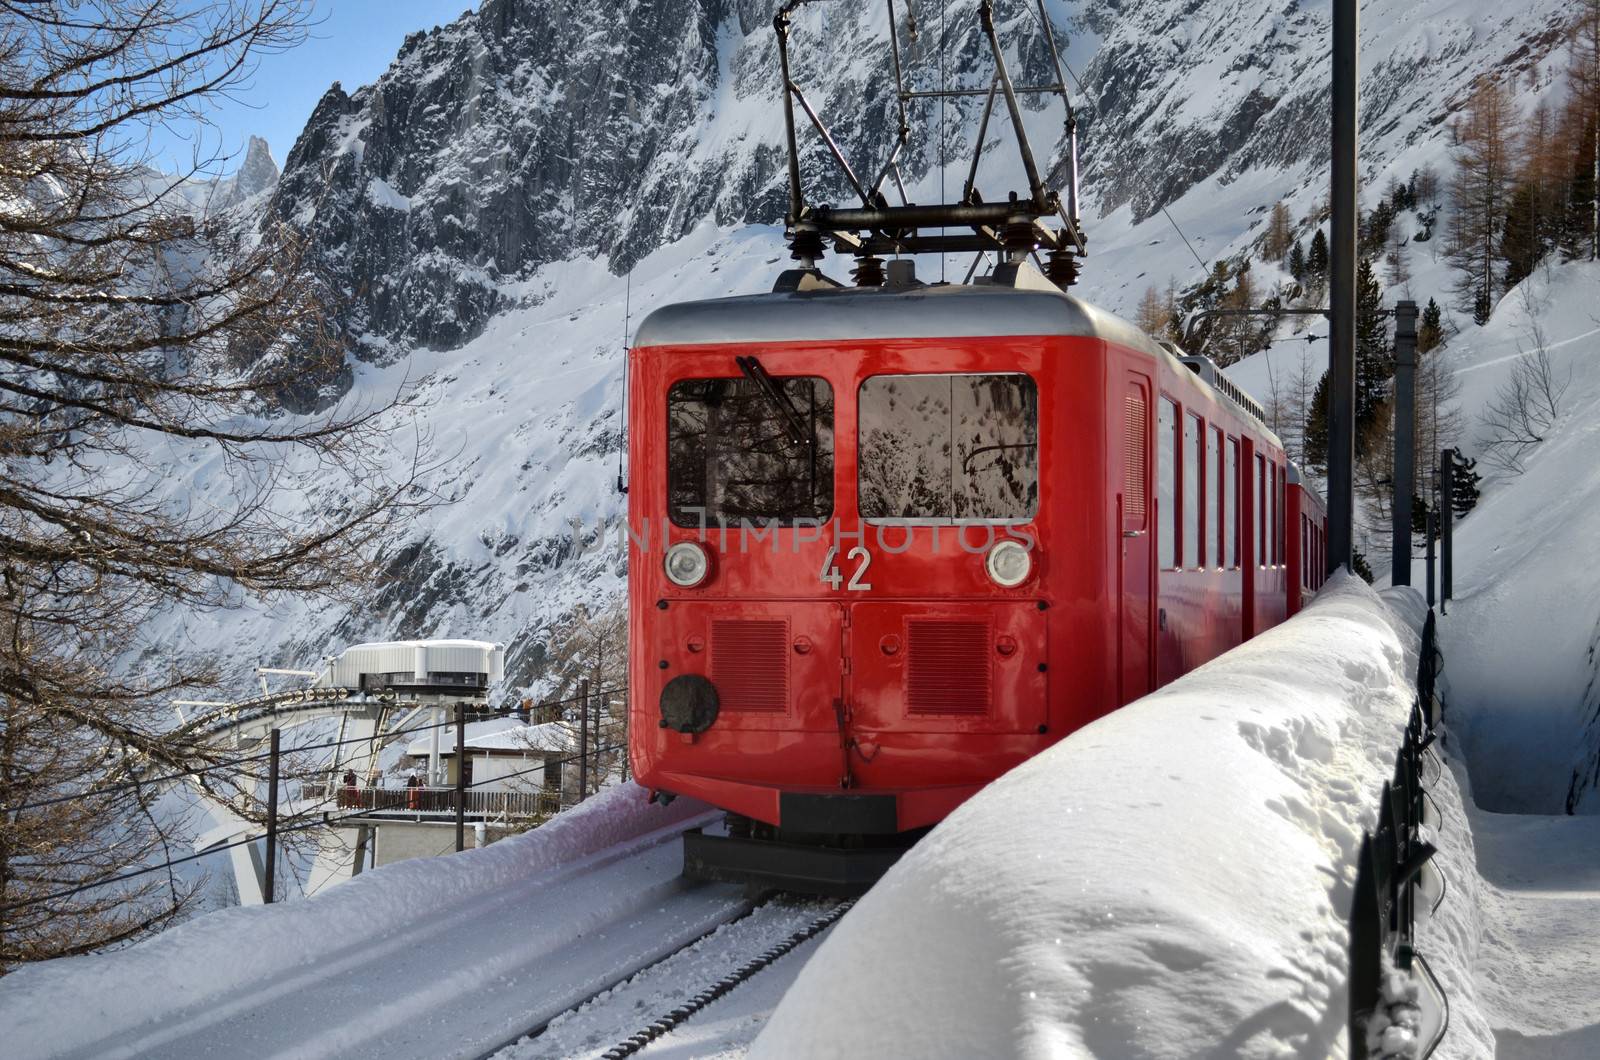 Small, red mountain train climbing railway in the snow